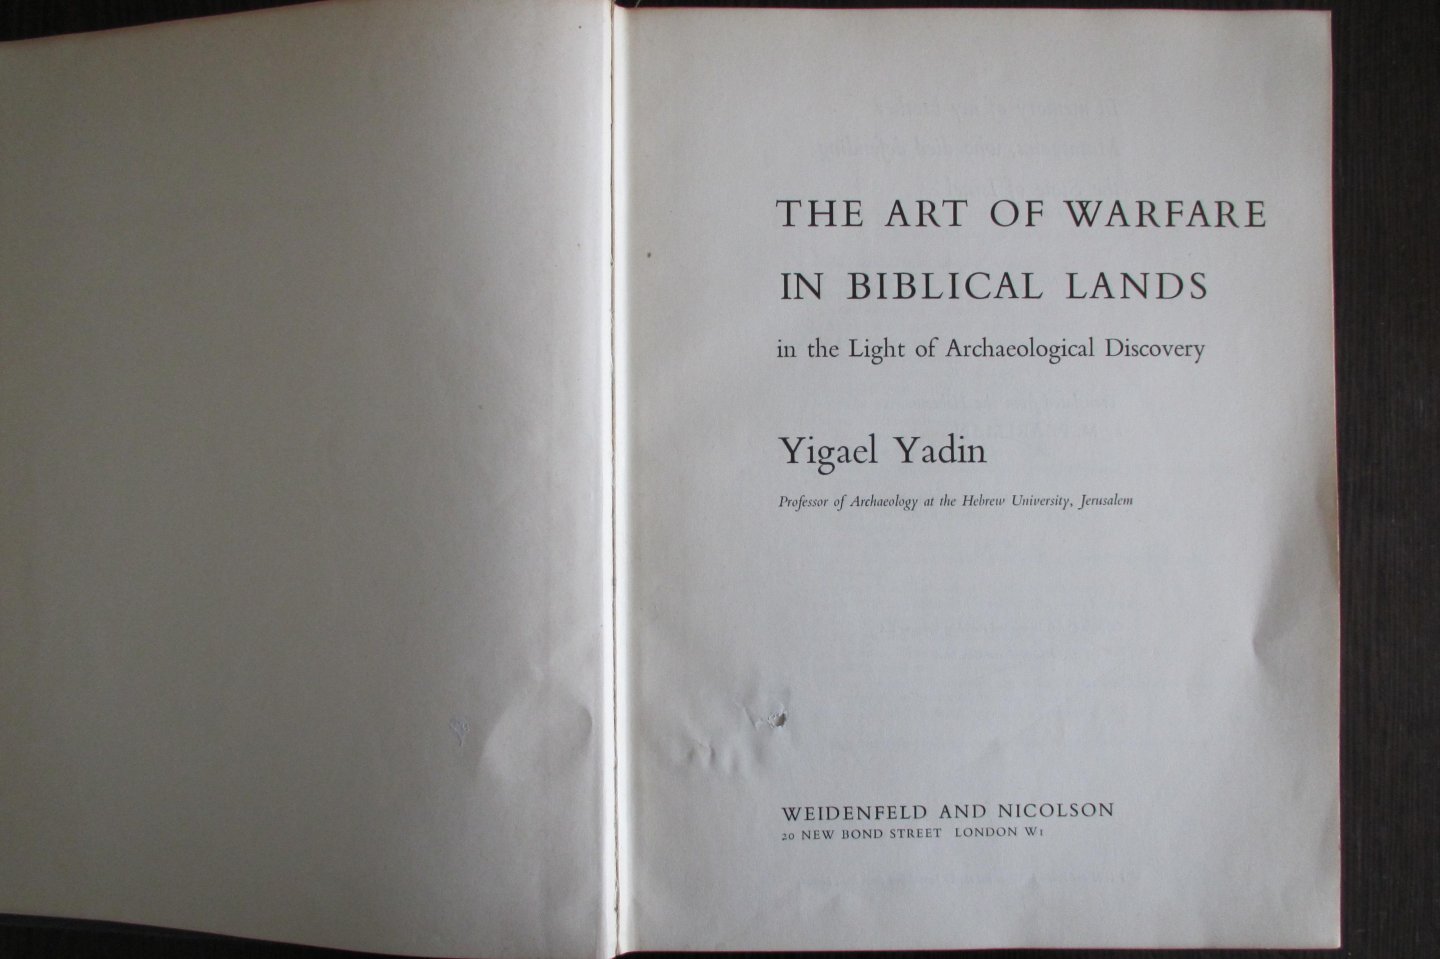 Yigael Yadin - The Art of Warfare in Biblical Lands in the light of archaeological discovery